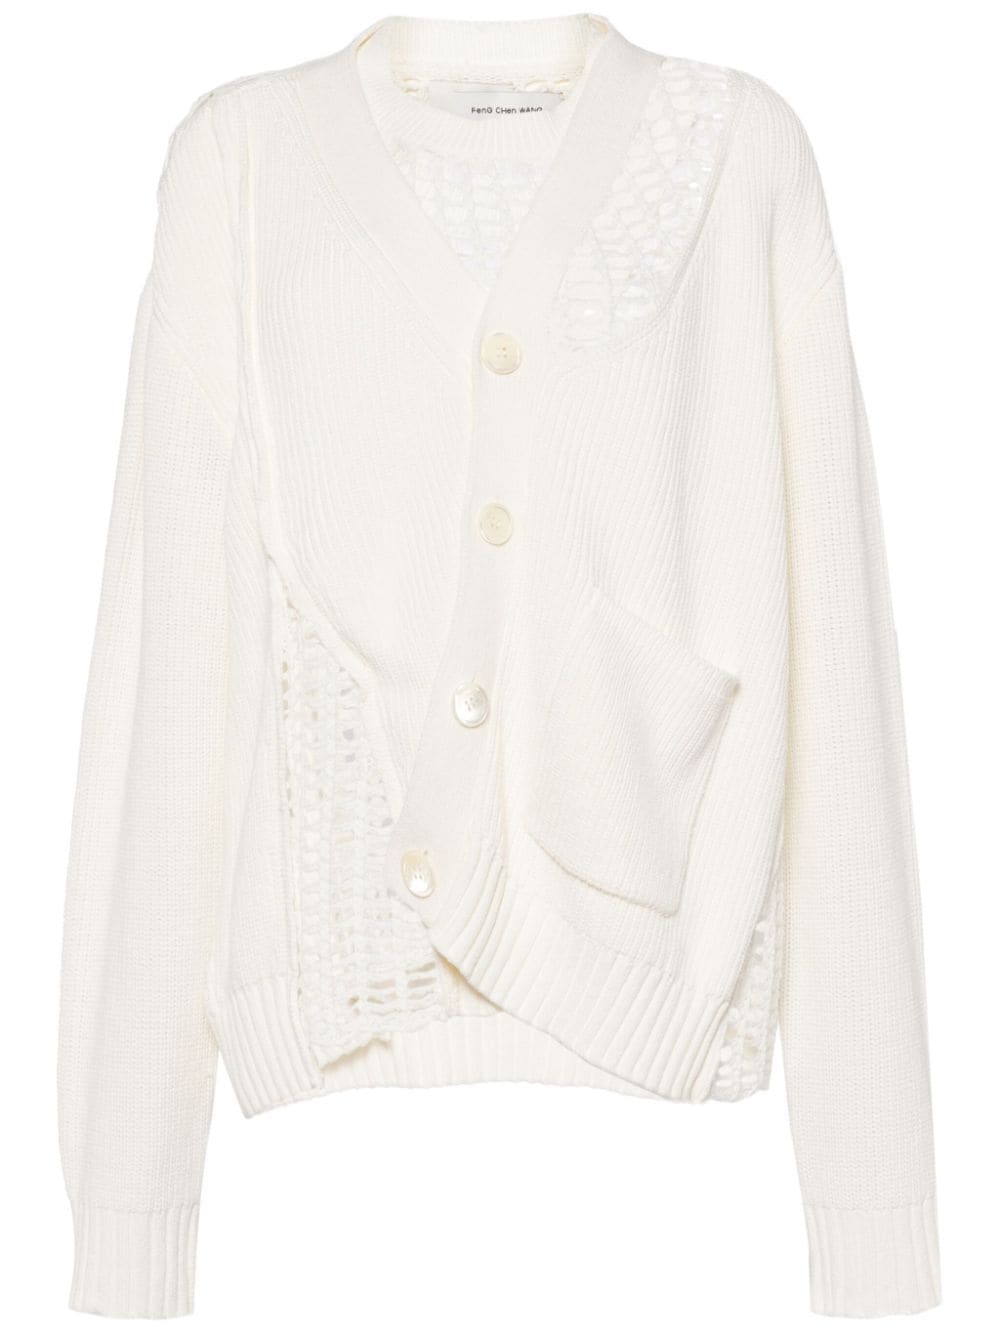 Feng Chen Wang Open-knit Layered Cotton Cardigan In Neutral